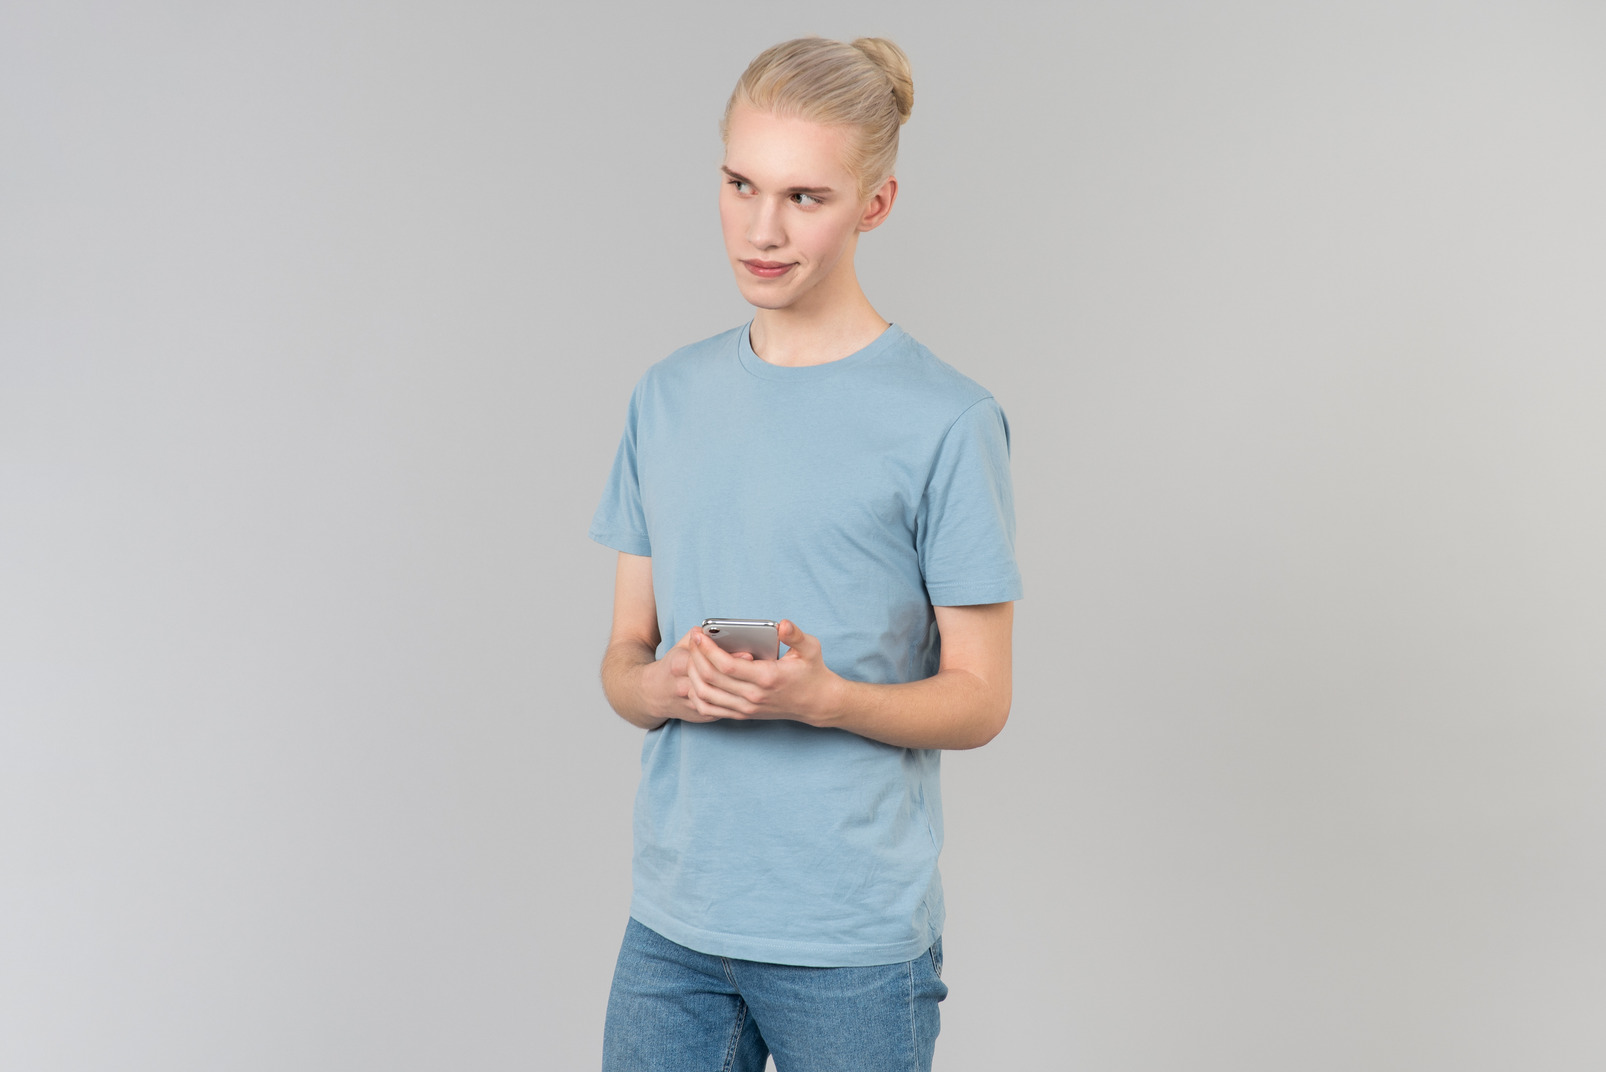 Young guy holding smartphone